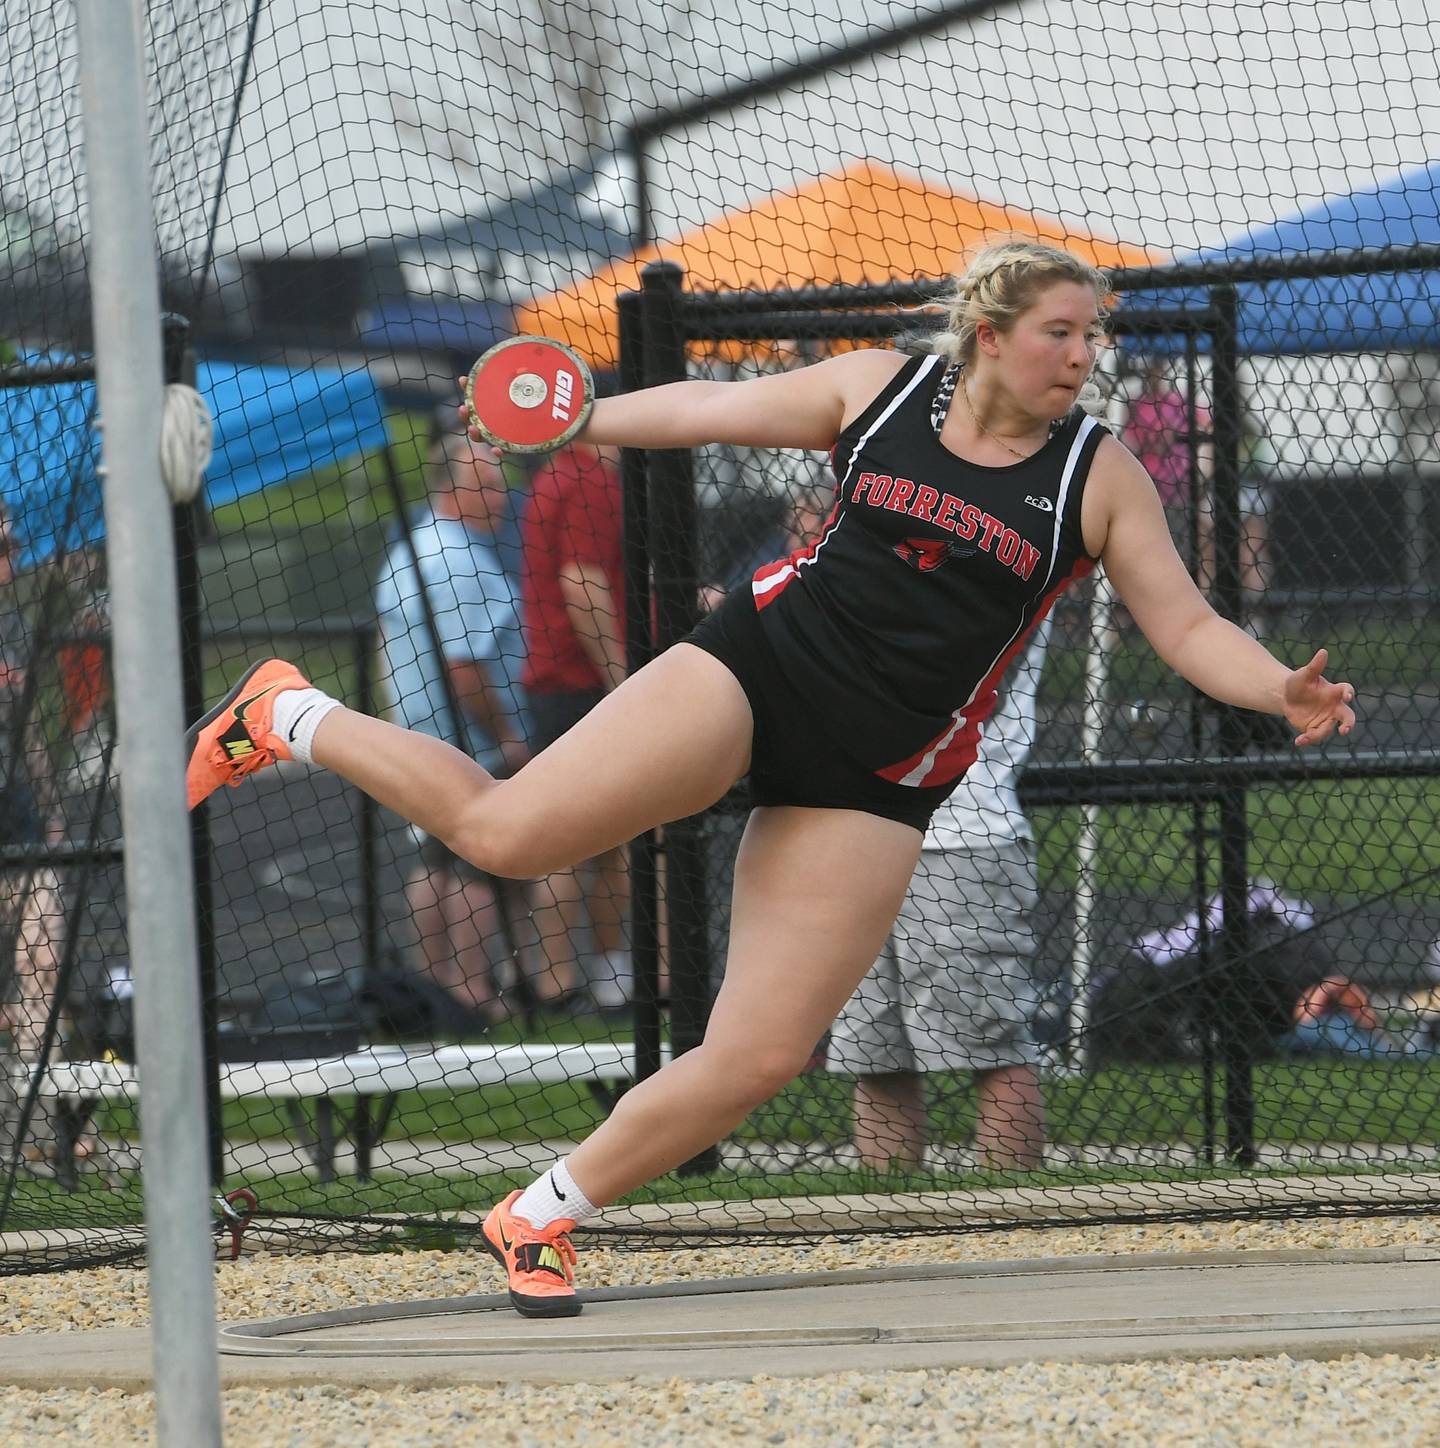 Forreston-Polo's Sydni Badertscher qualified for the state meet in the discus at the 1A Winnebago Sectional on Friday, May 13.